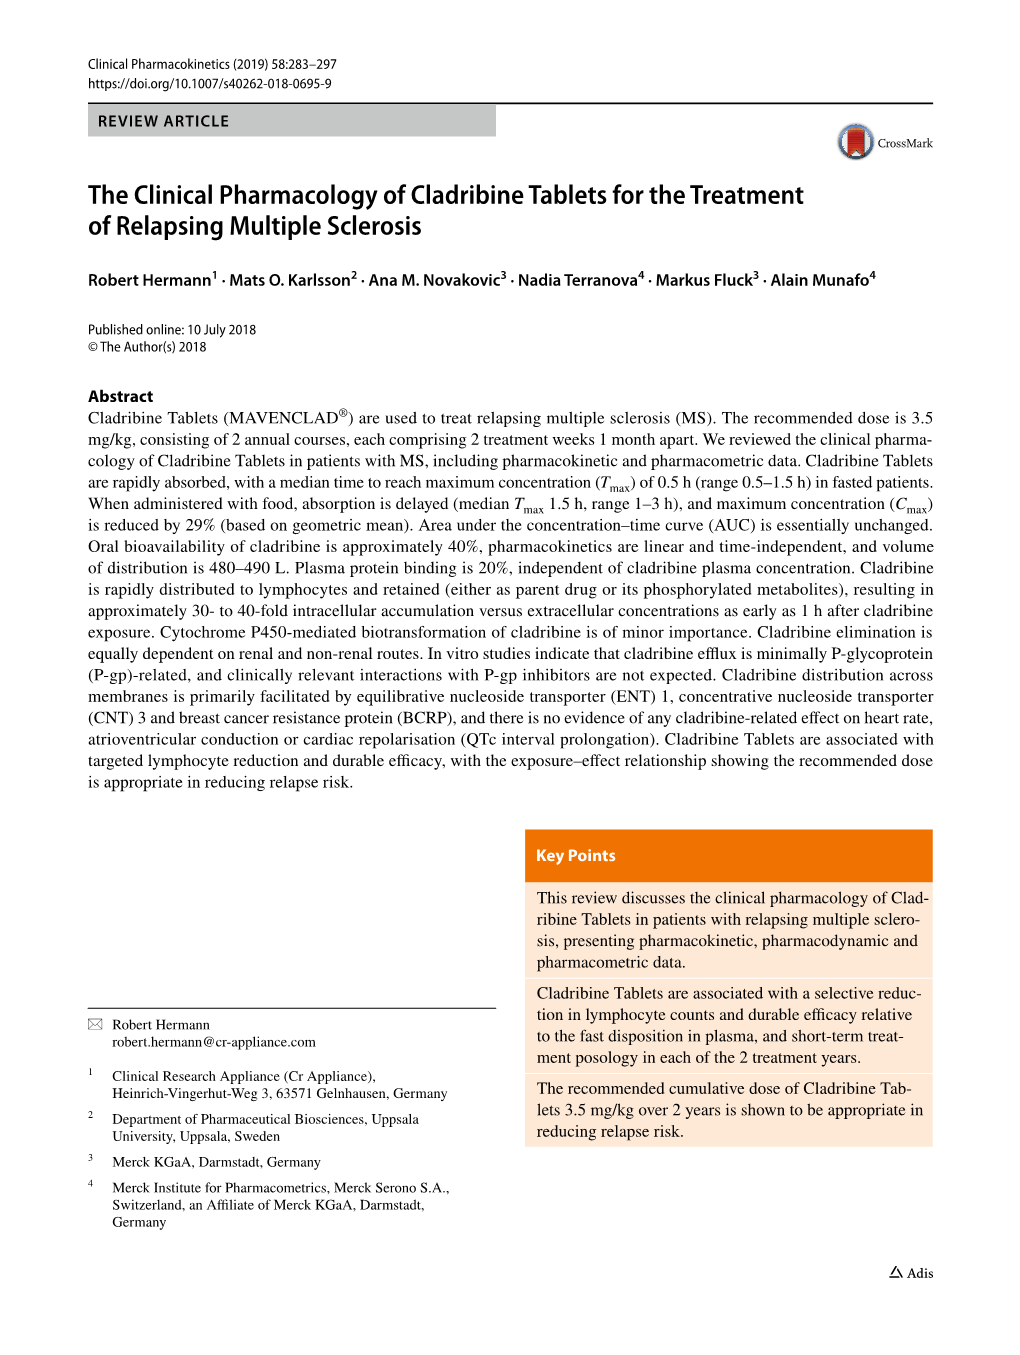 The Clinical Pharmacology of Cladribine Tablets for the Treatment of Relapsing Multiple Sclerosis